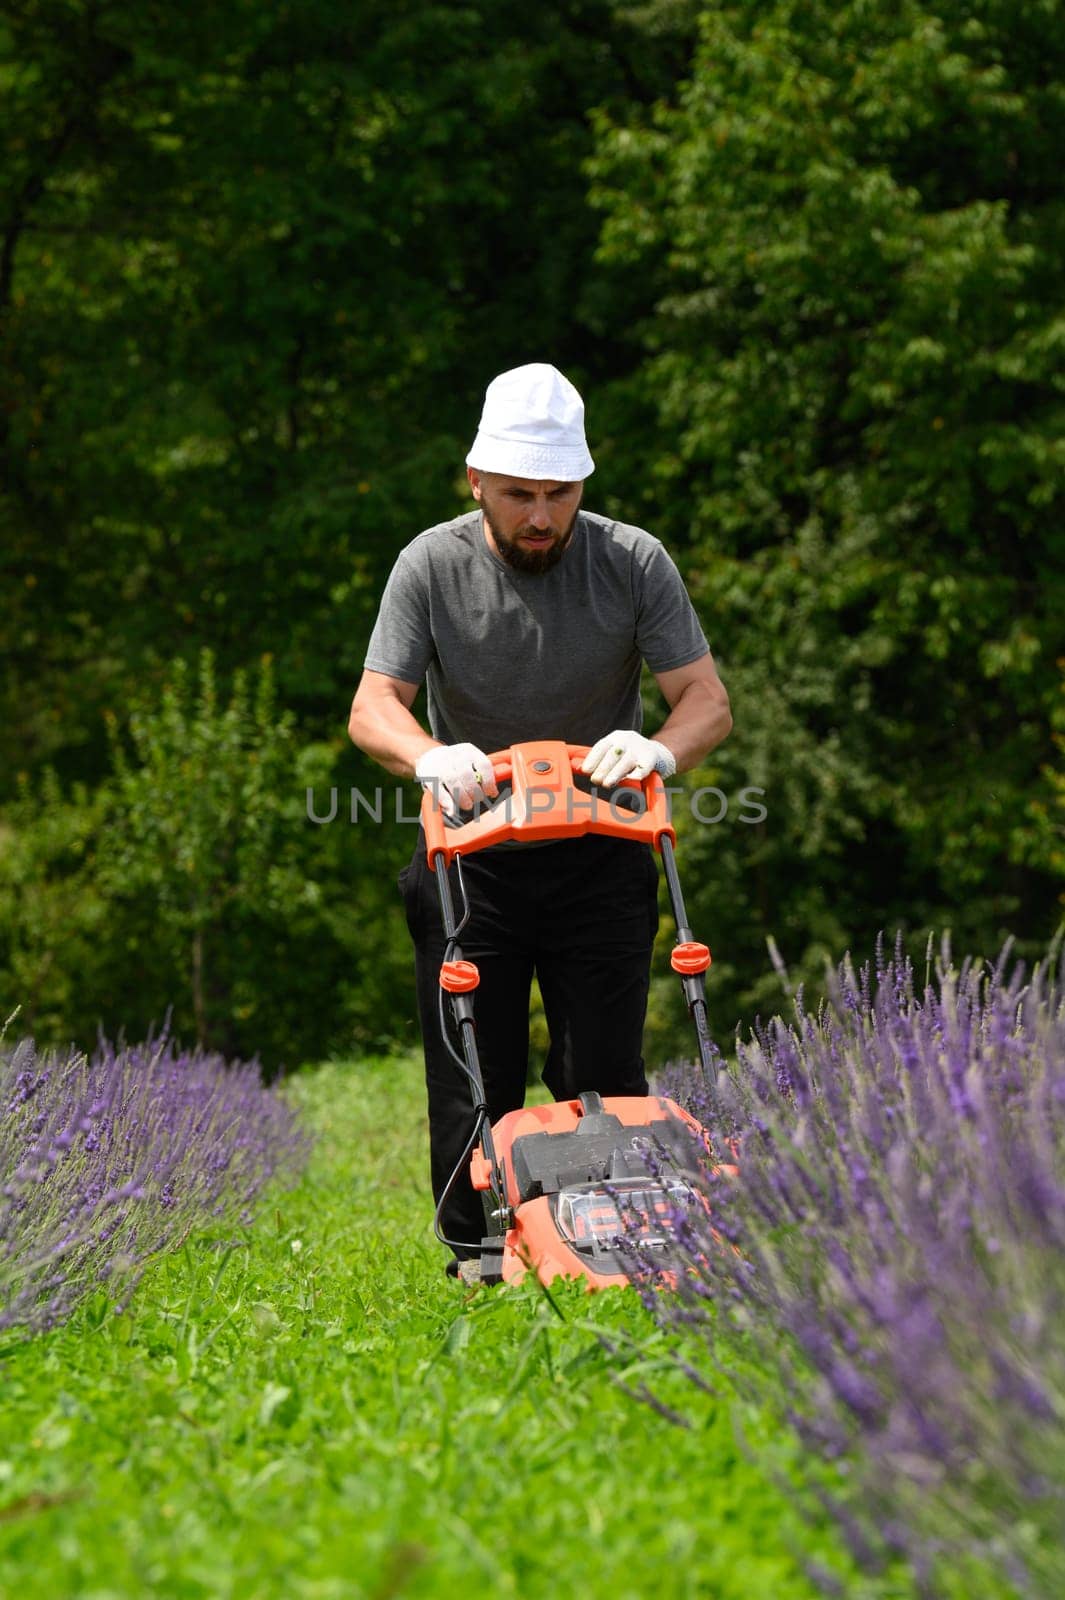 Mowing the grass in the lavender field with an electric lawnmower, an economical and environmentally friendly lawnmower. Lithium Ion battery powered Electric Lawn mower.